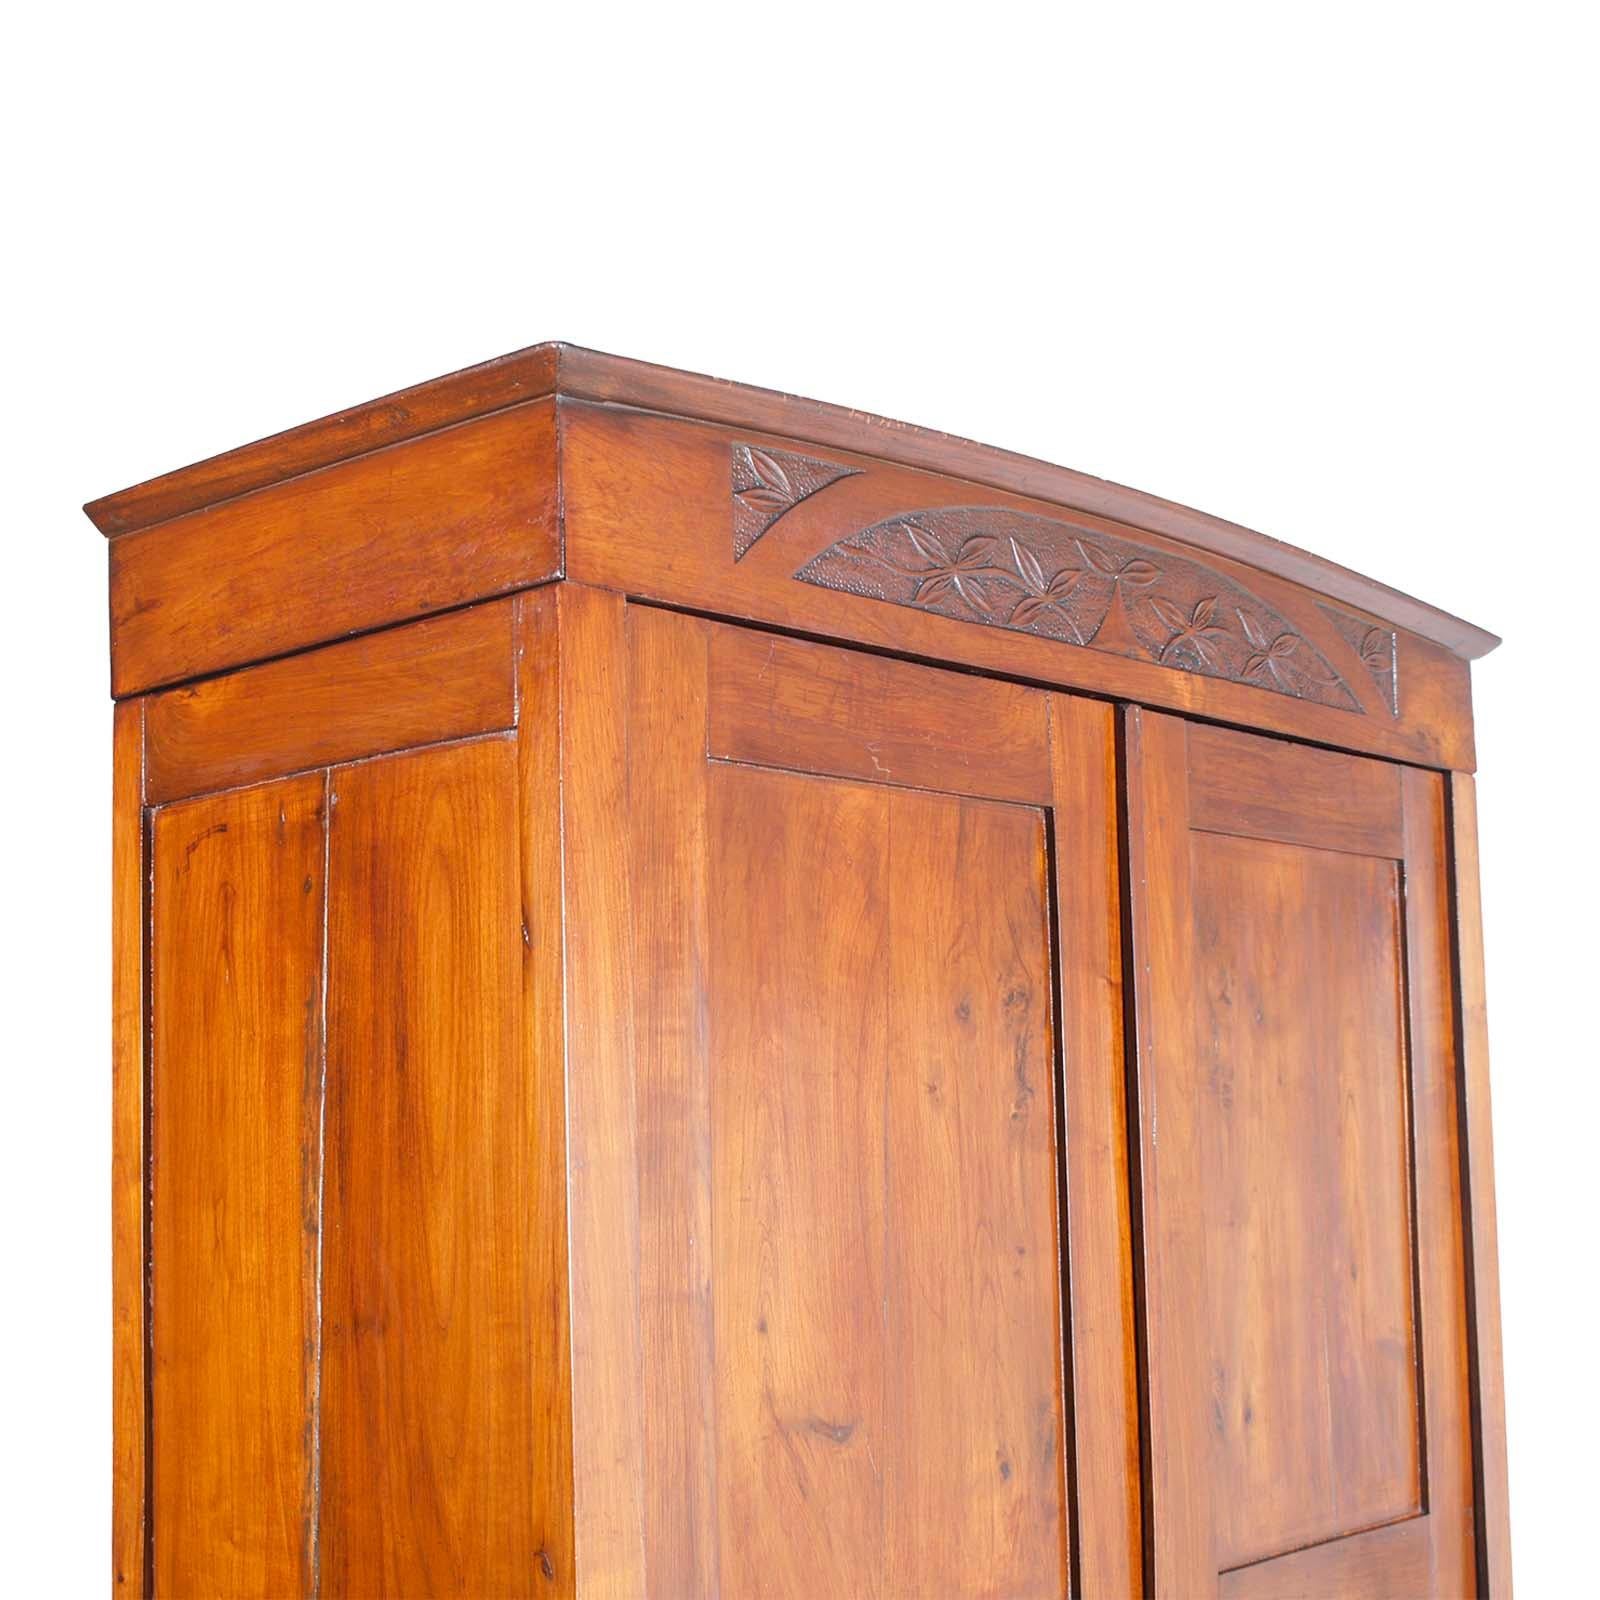 Antique Florentine Art Nouveau wardrobe or bookcase in solid cherry wood, hand-carved, from the end of the 19th century, wax polished.
All massive beautiful Classic Art Nouveau wardrobe or bookcase by Dini & Puccini , recovered from a noble family